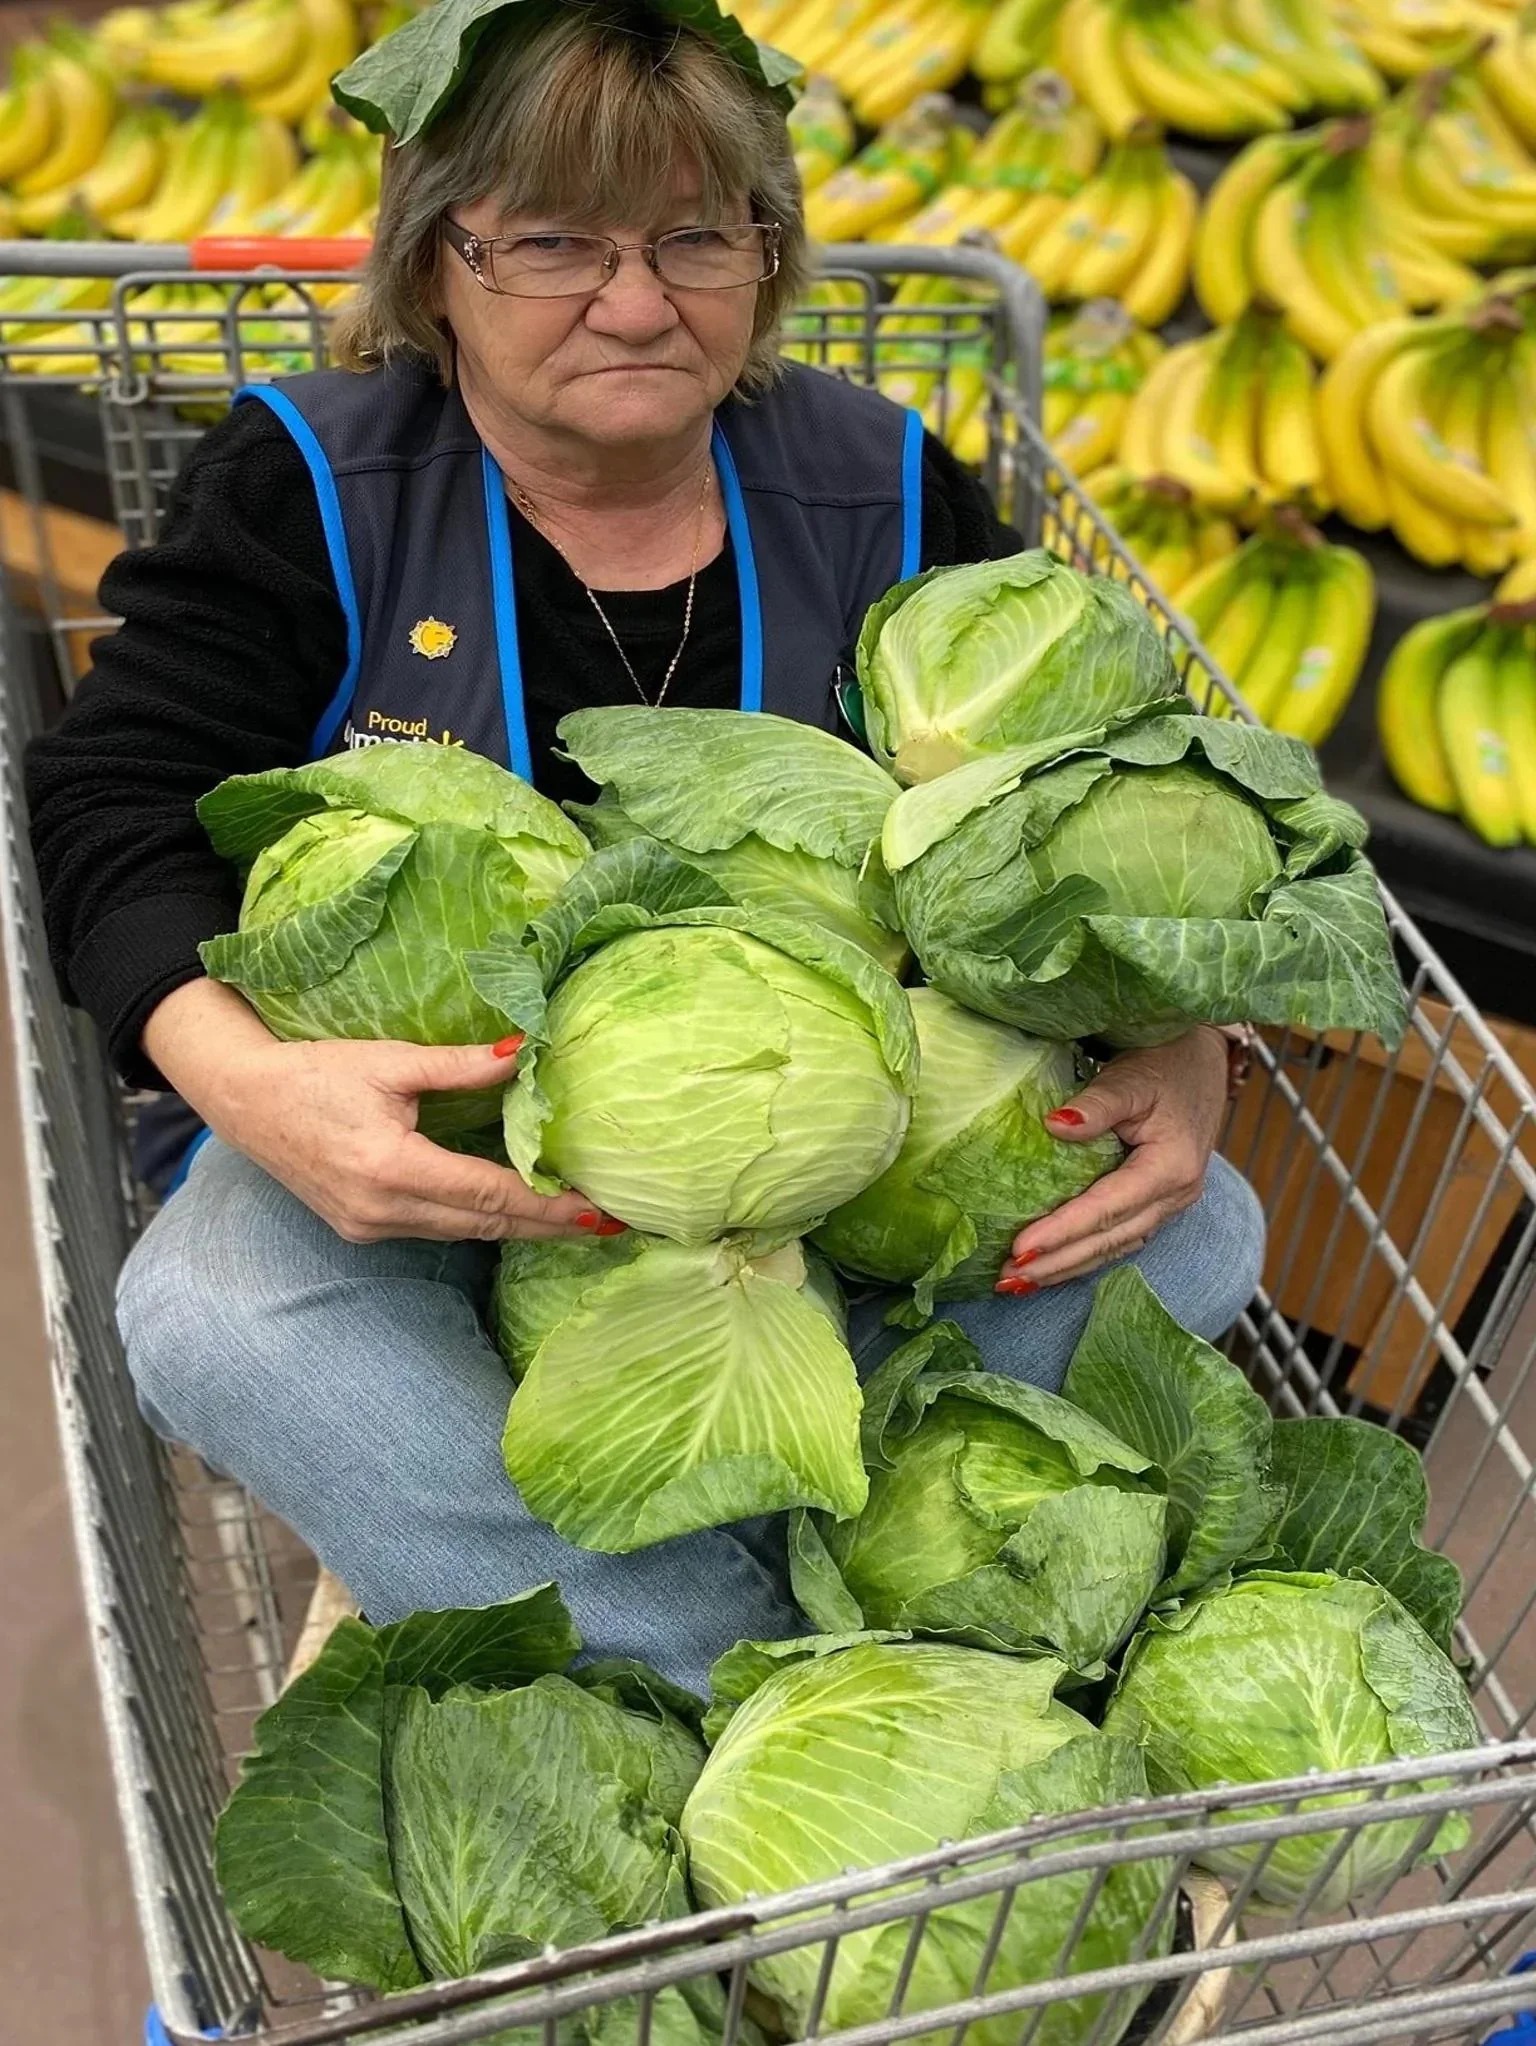 Cabbage Retail Worker Blank Meme Template